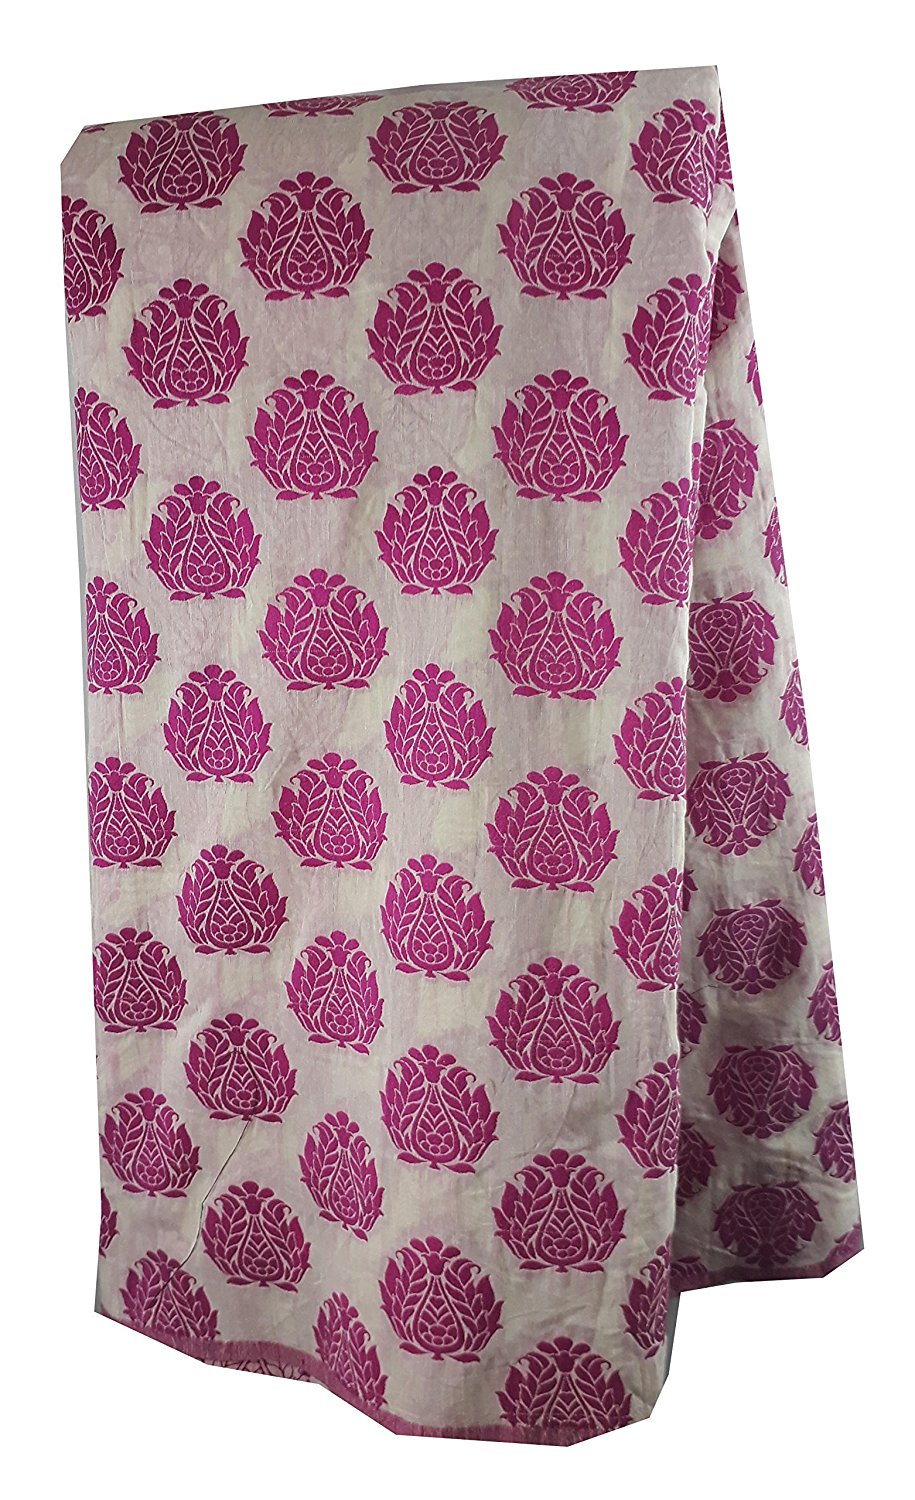 fabric sale online india kurti fabric online Woven Polycotton Fauchia Pink, Rani Pink, White 46 inches Wide 8038